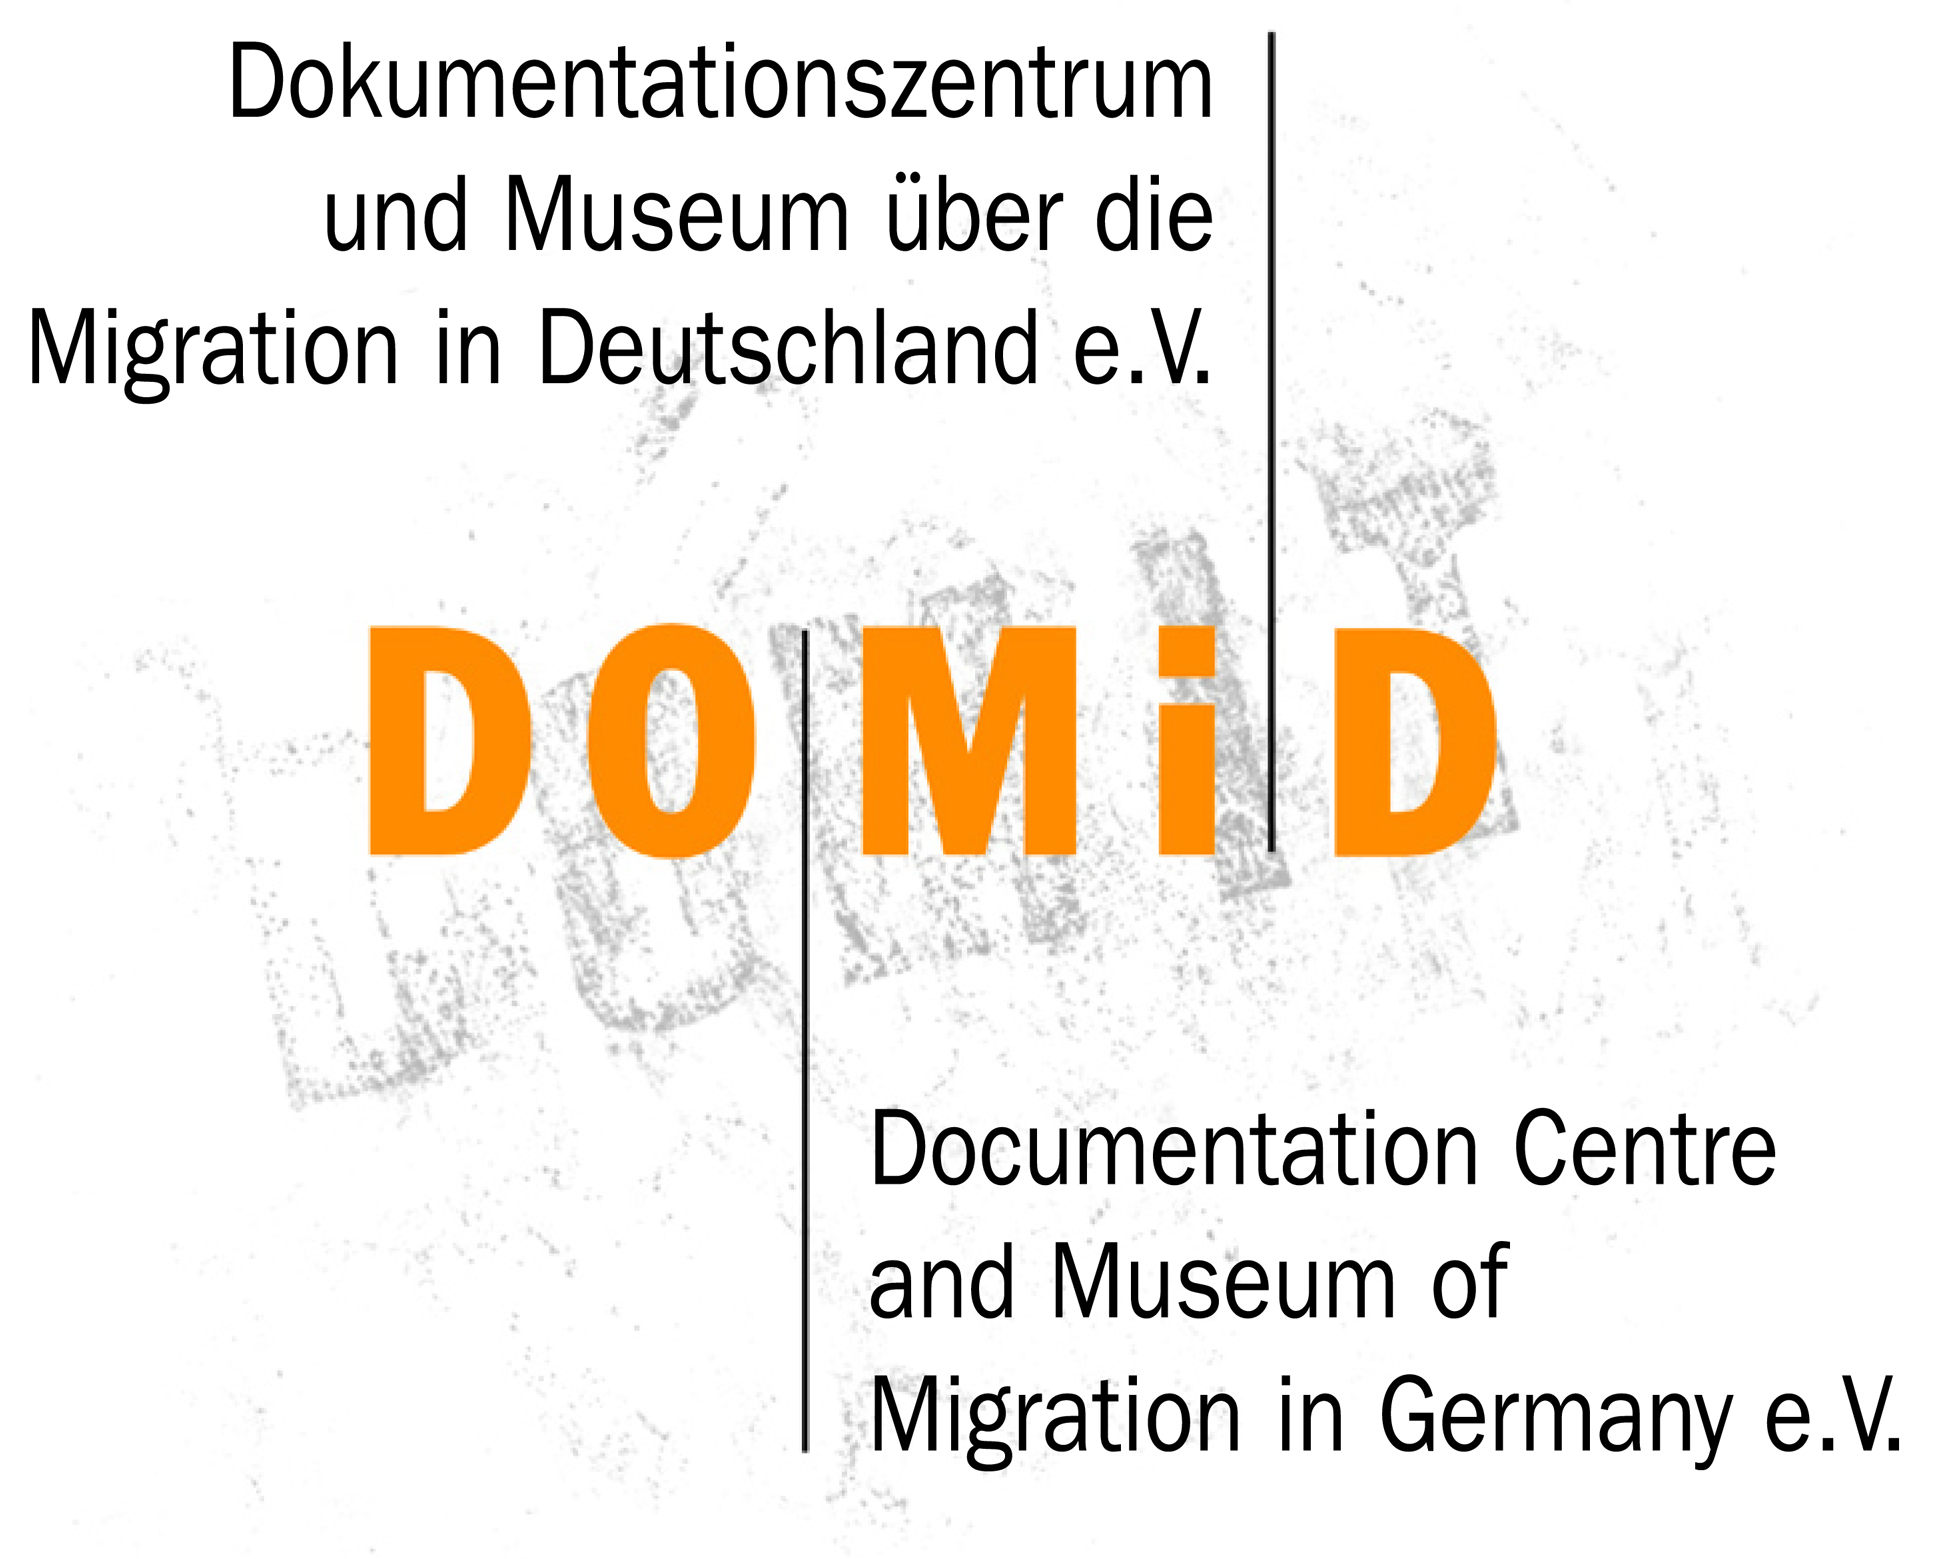 2007: In this year, DOMiT merged with the association "Migrationsmuseum in Deutschland e.V.". The new association DOMiD - Dokumentationszentrum und Museum über die Migration in Deutschland e.V. is no longer a self-organisation of Turkish migrants, but brings together migrants of different origins and Germans without a migration background. The composition of the organisation's bodies is intended to adequately represent the diversity of immigration to Germany. Photo: DOMiD archive, Cologne